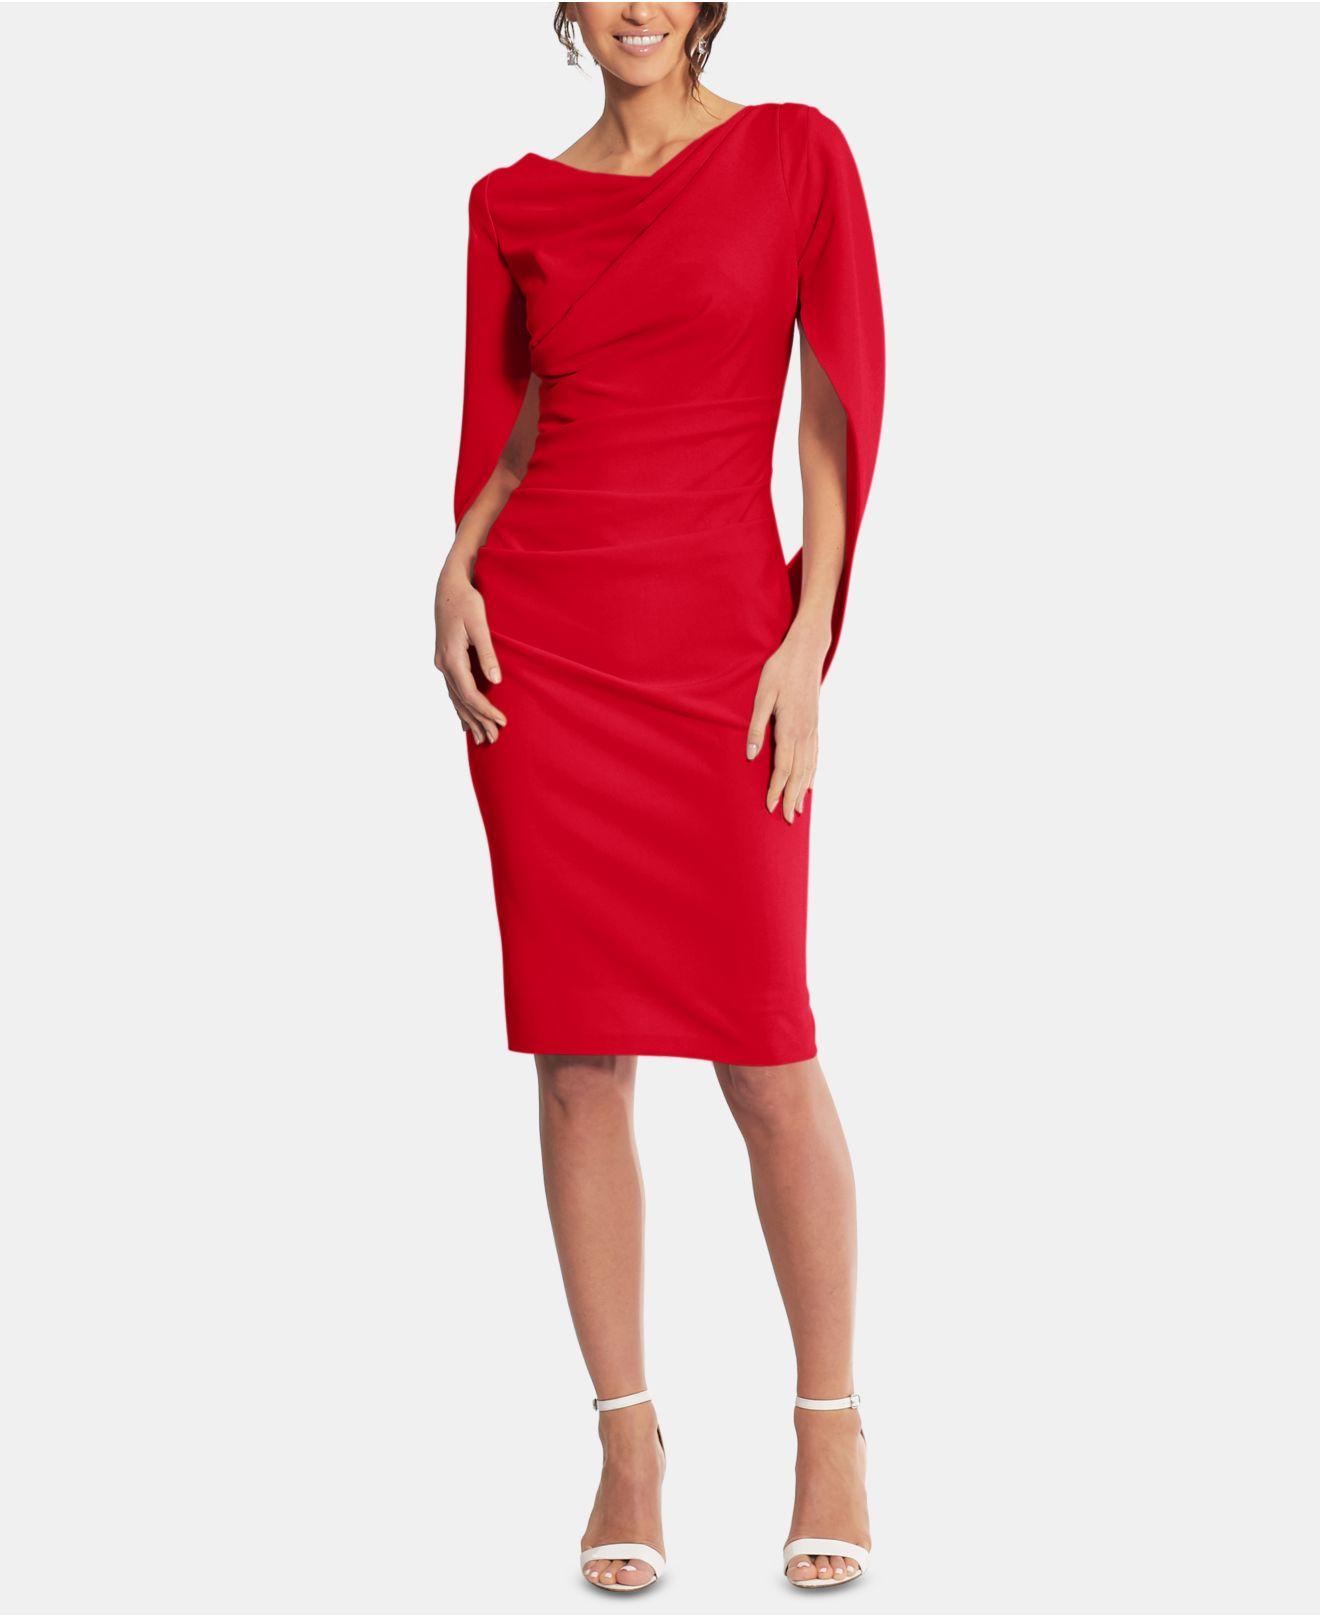 Betsy & Adam Synthetic Caped Sheath Dress in Red - Lyst